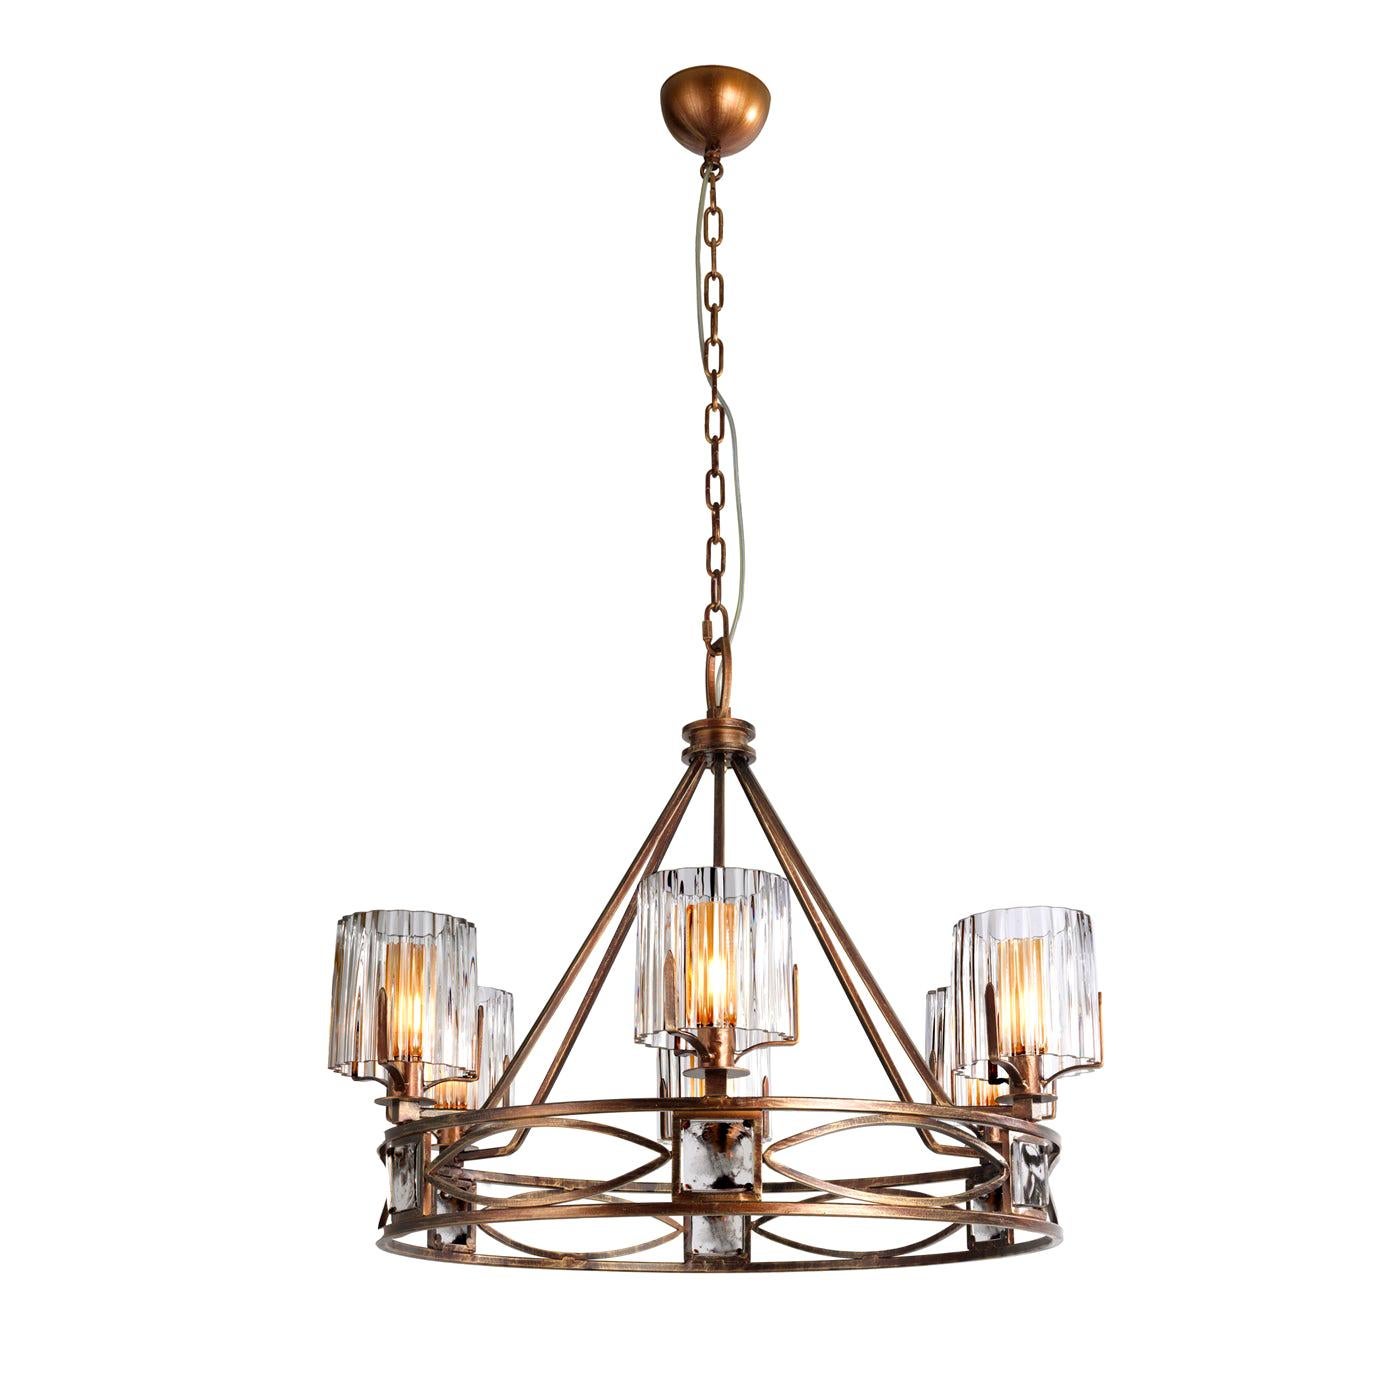 Decorative Bronze and Amber Chandelier For Sale